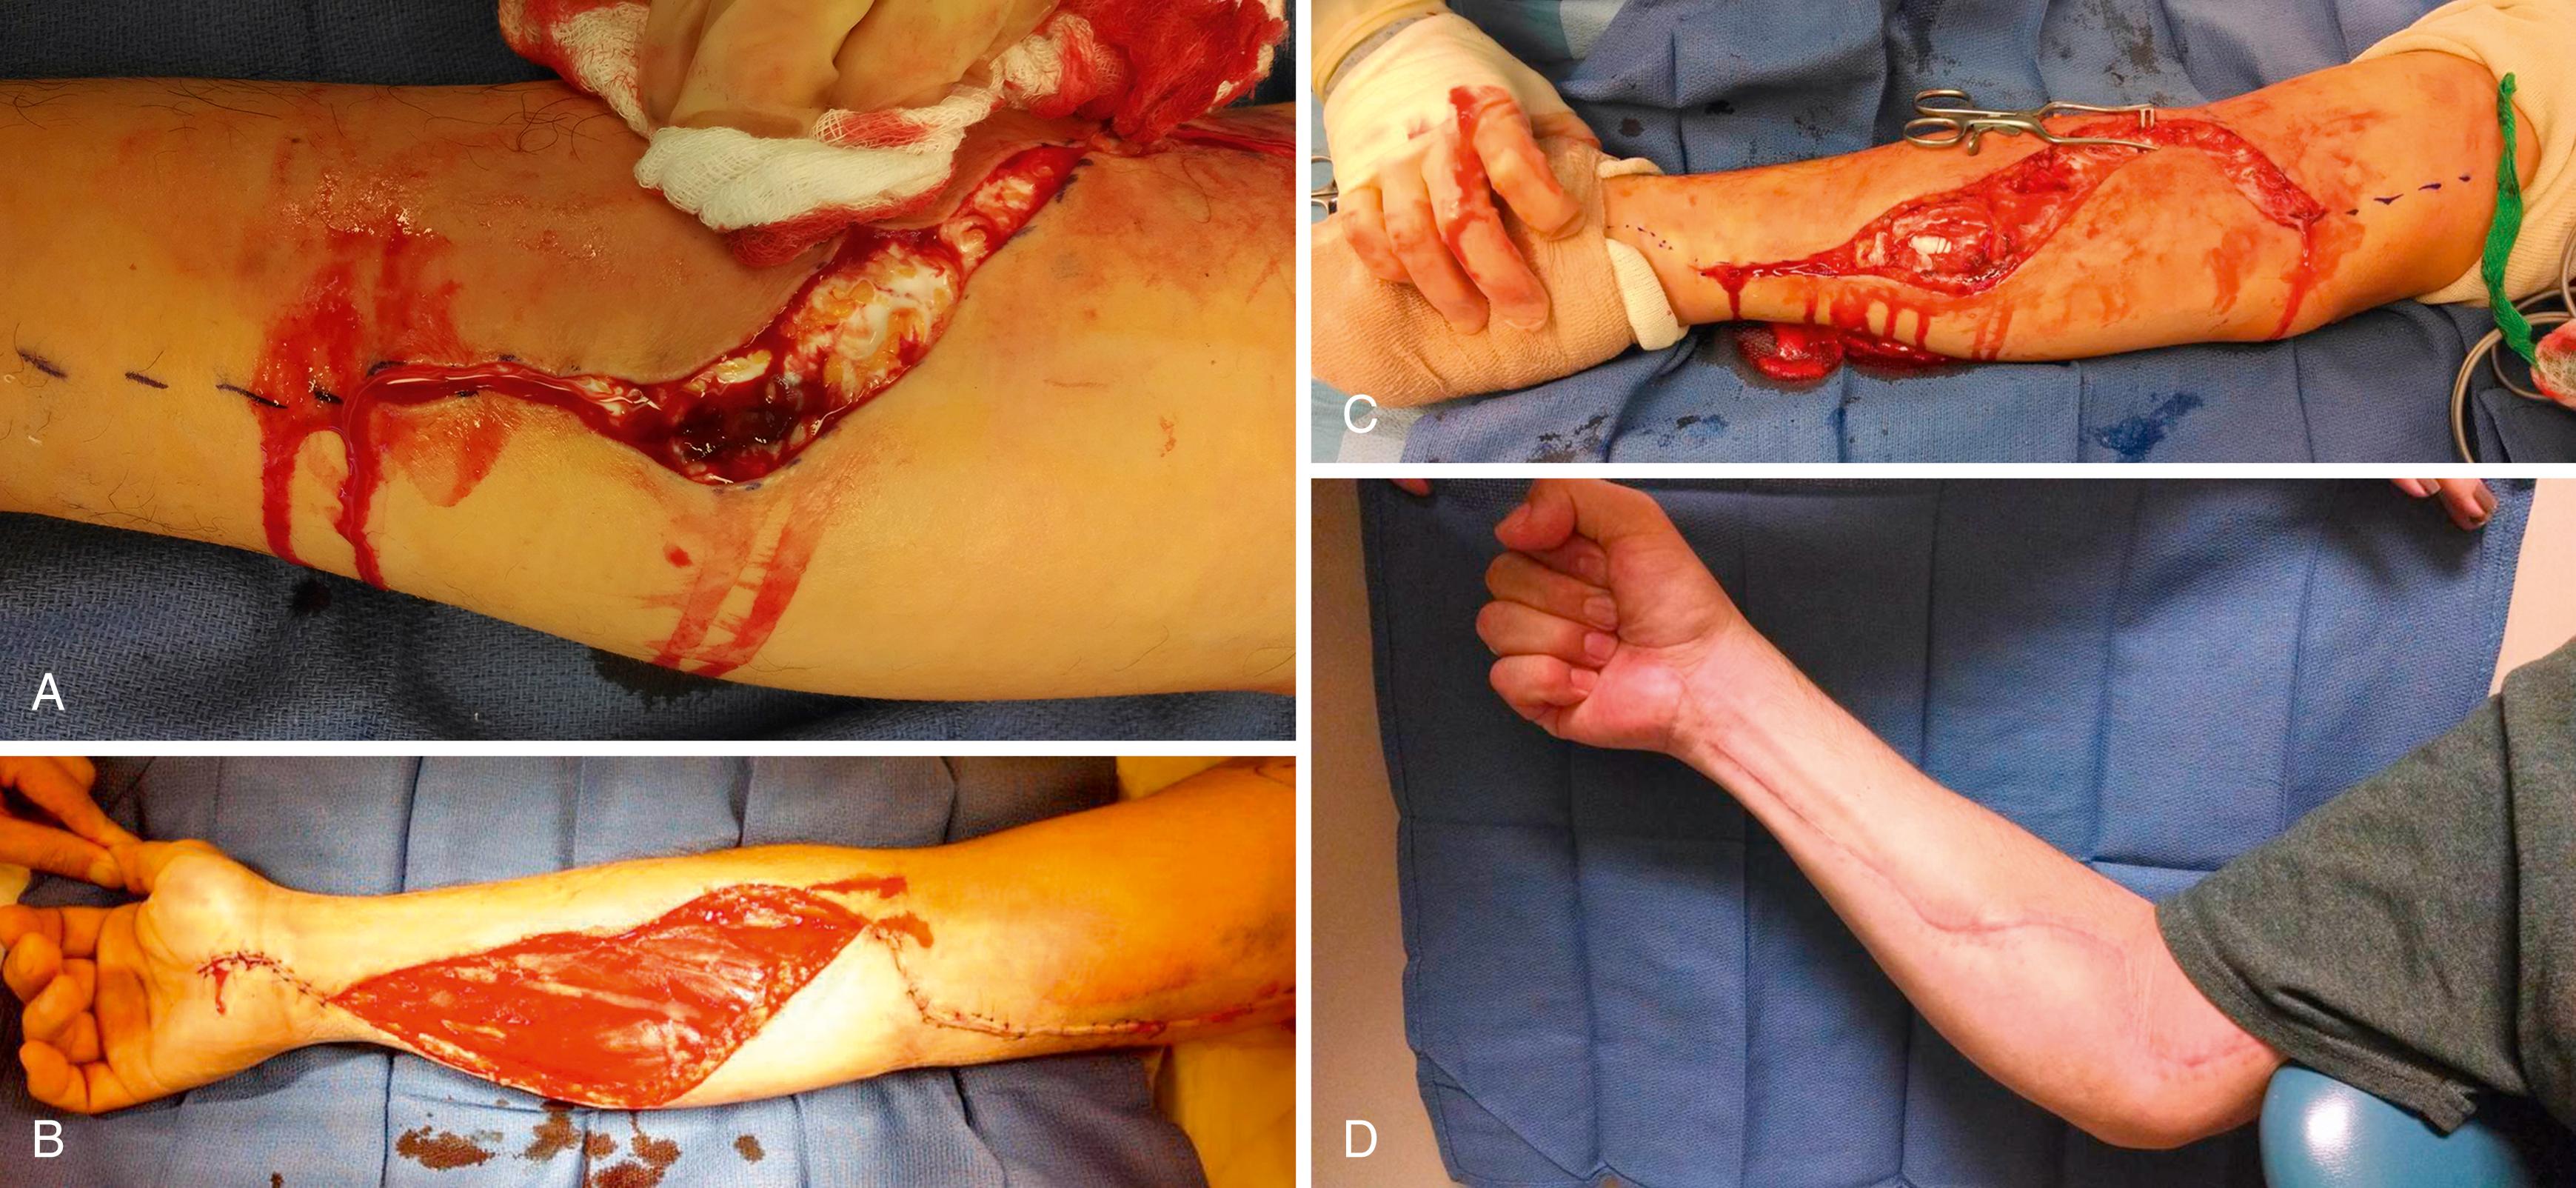 eFig. 51.4, Extravasation of the right upper extremity. Immediate fasciotomy ( A and B ) and partial wound closure (C) . D, Wound healing at 8 weeks.